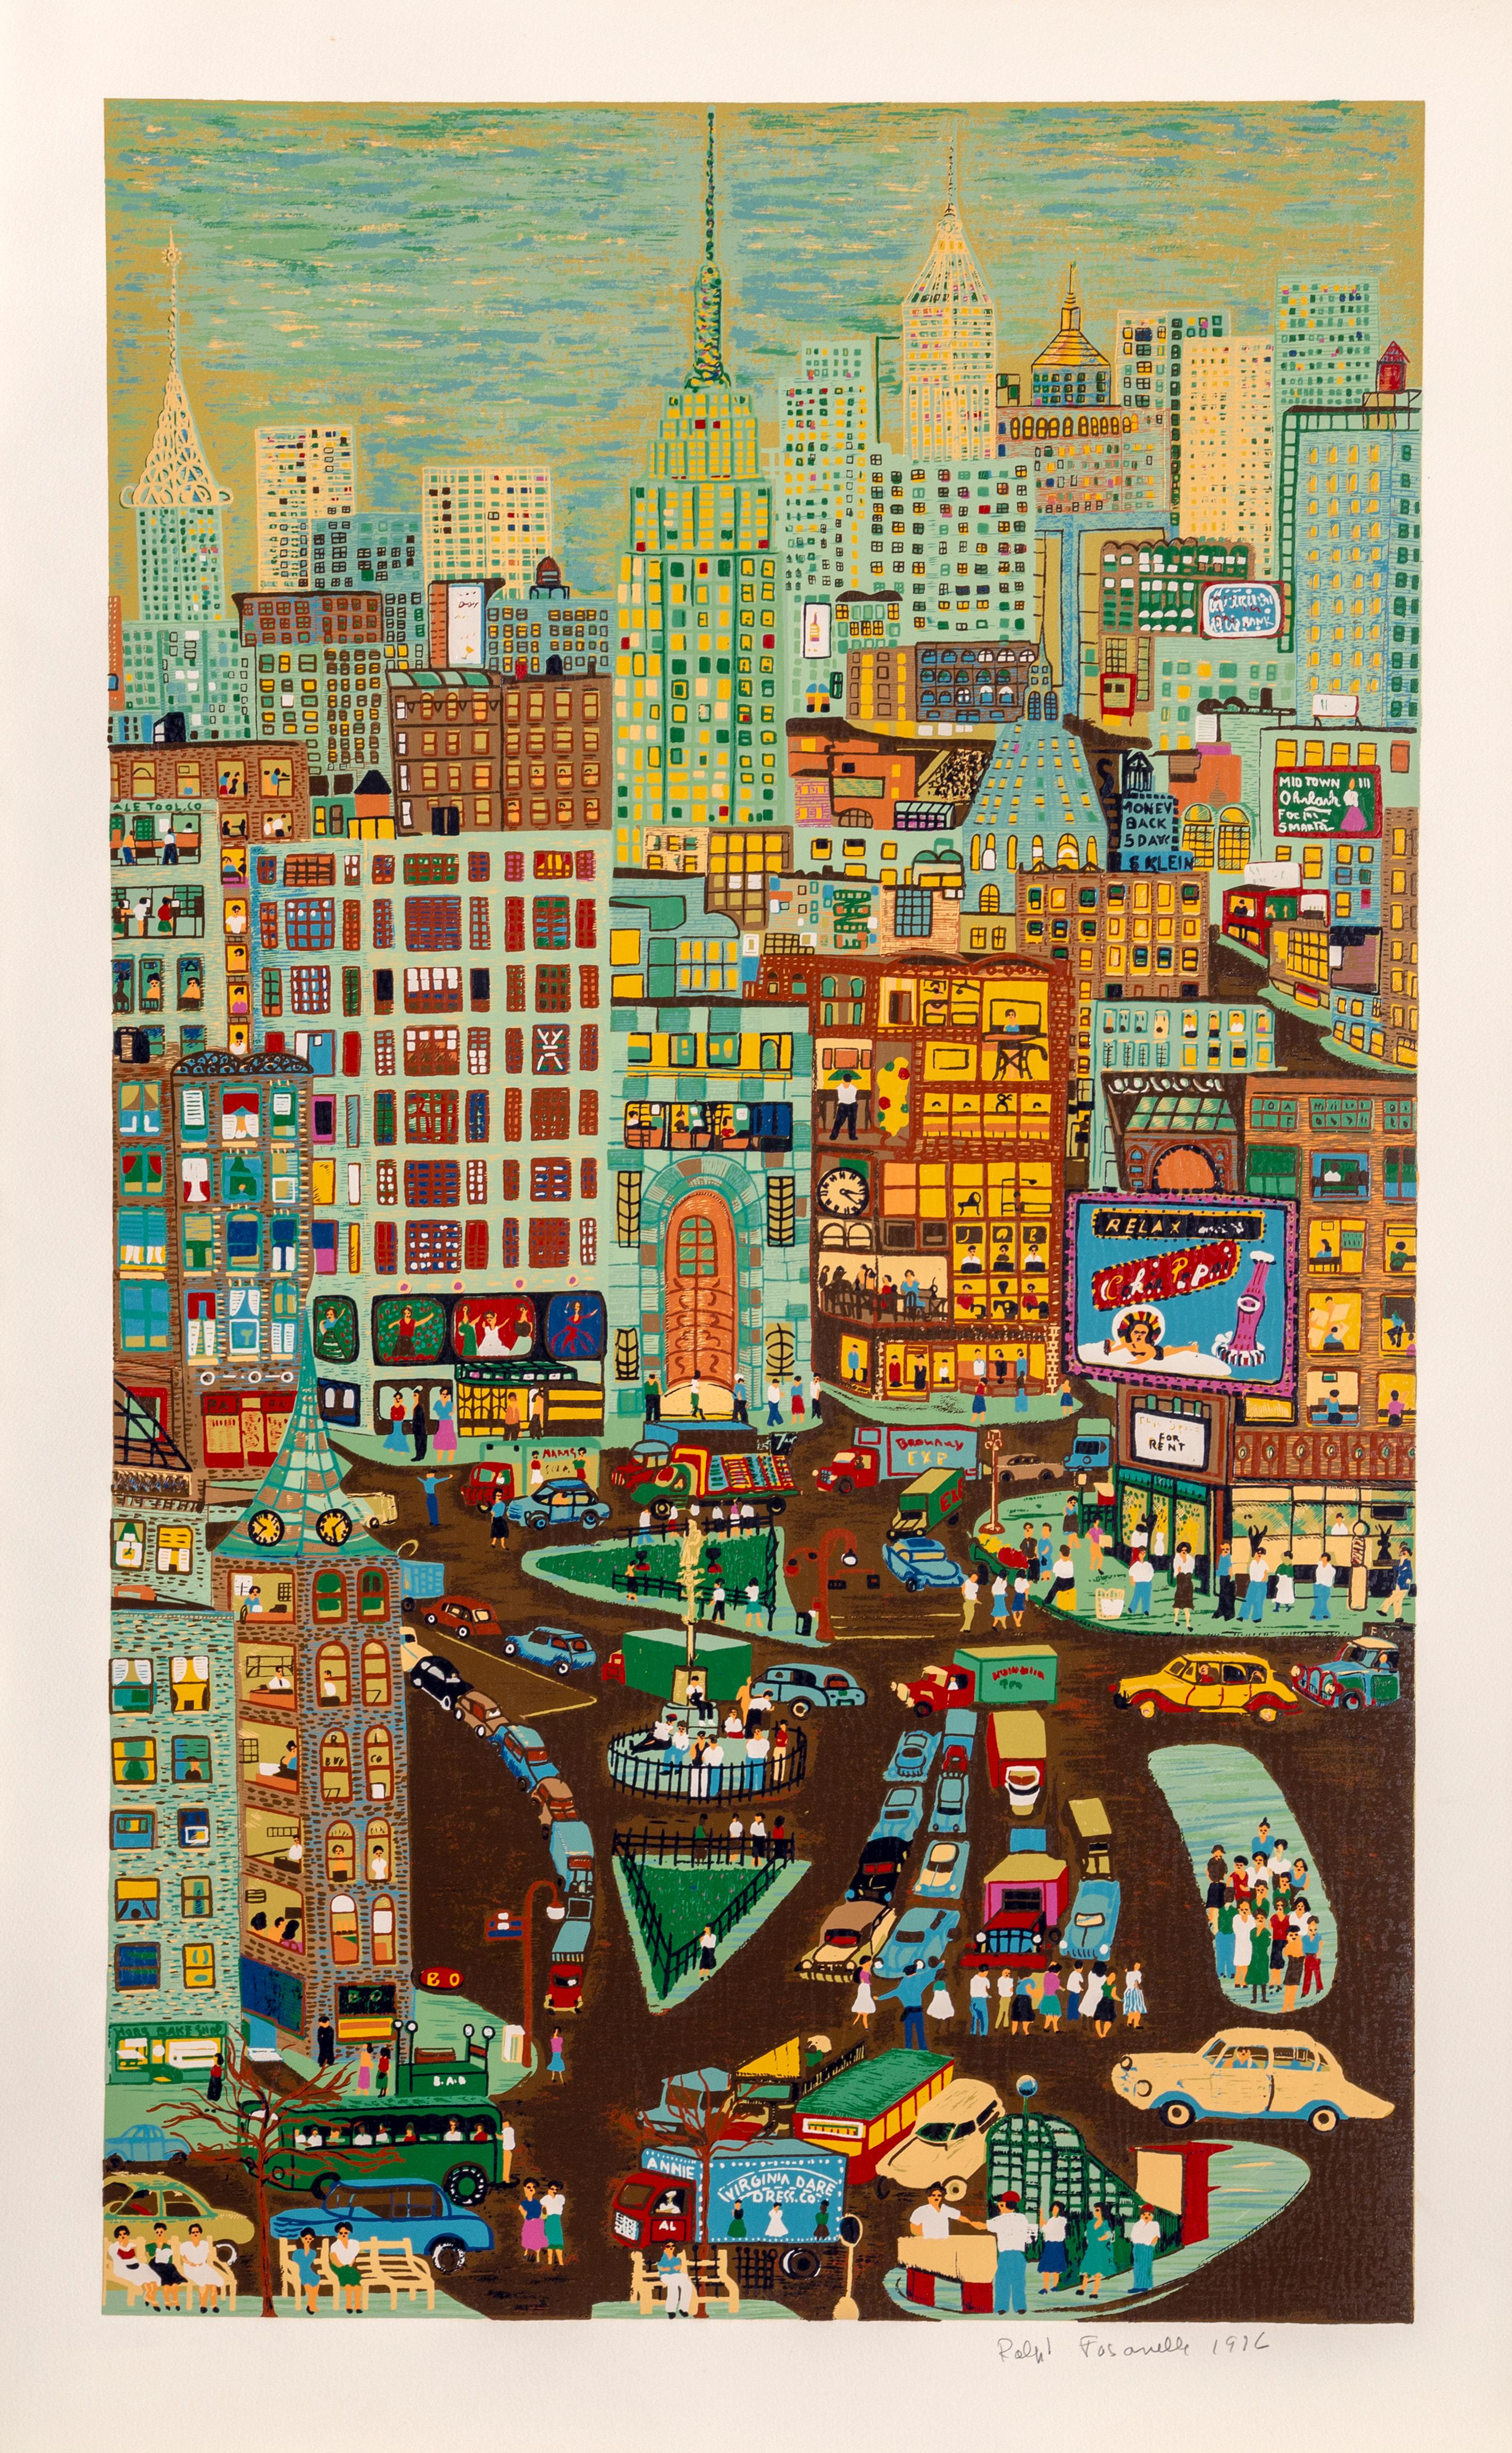 Artist: Ralph Fasanella, American (1914 - 1997)
Title: Empire State
Year: 1974
Medium: Screenprint on Arches Paper, signed and numbered in pencil
Edition: 300
Image: 40 x 24 inches
Size: 45 in. x 28 in. (114.3 cm x 71.12 cm)